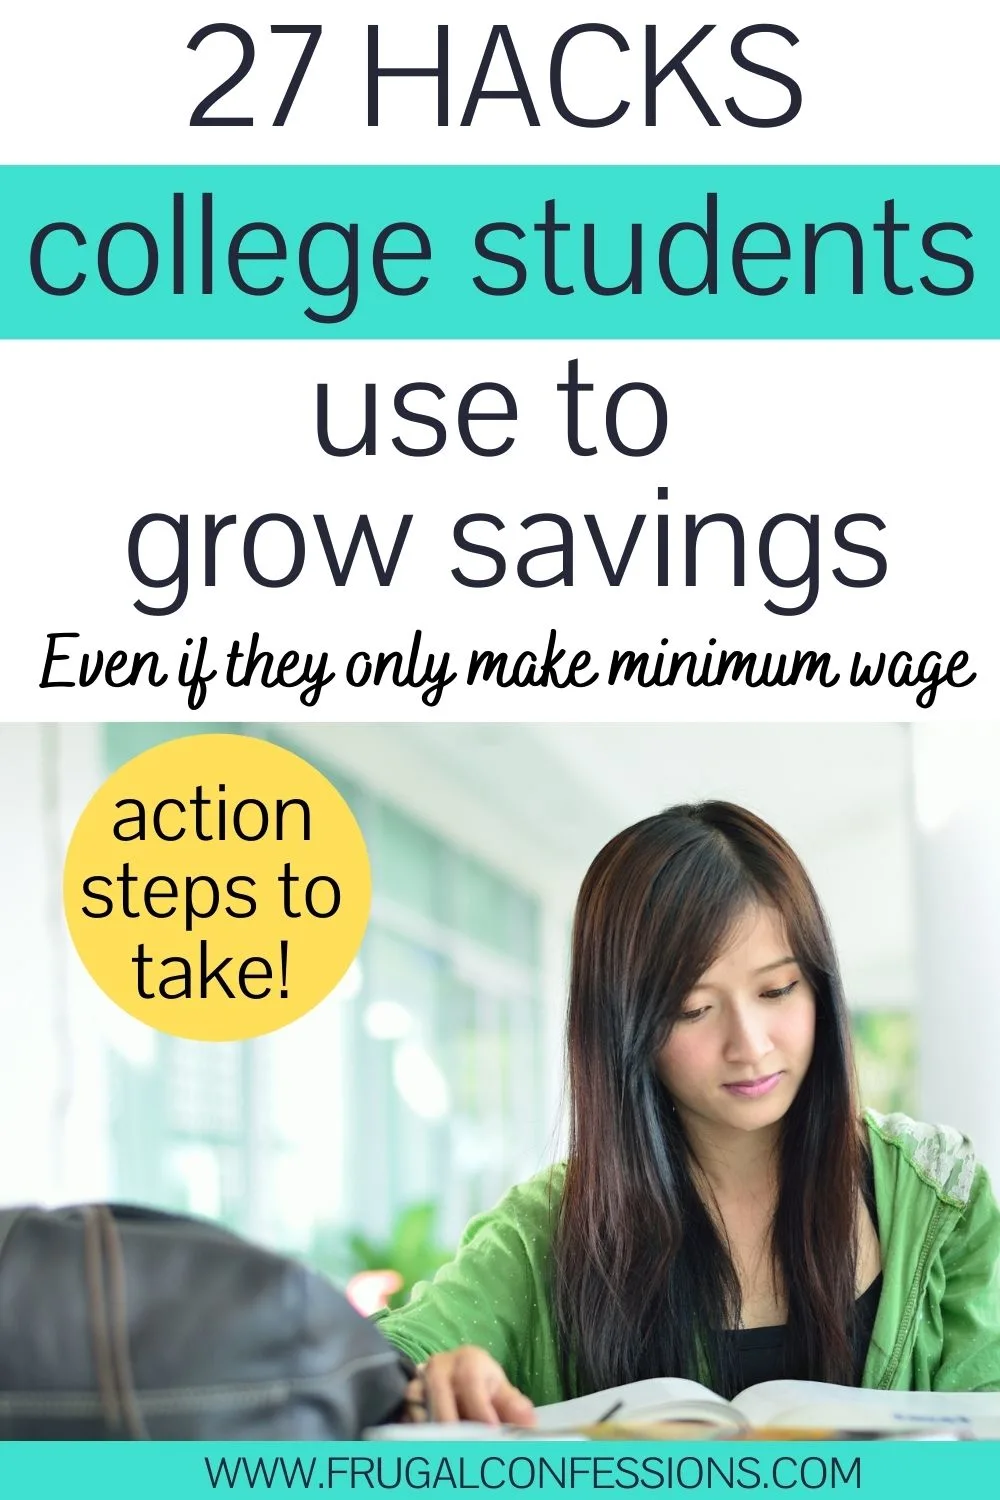 Saving Hacks For College Students - Society19